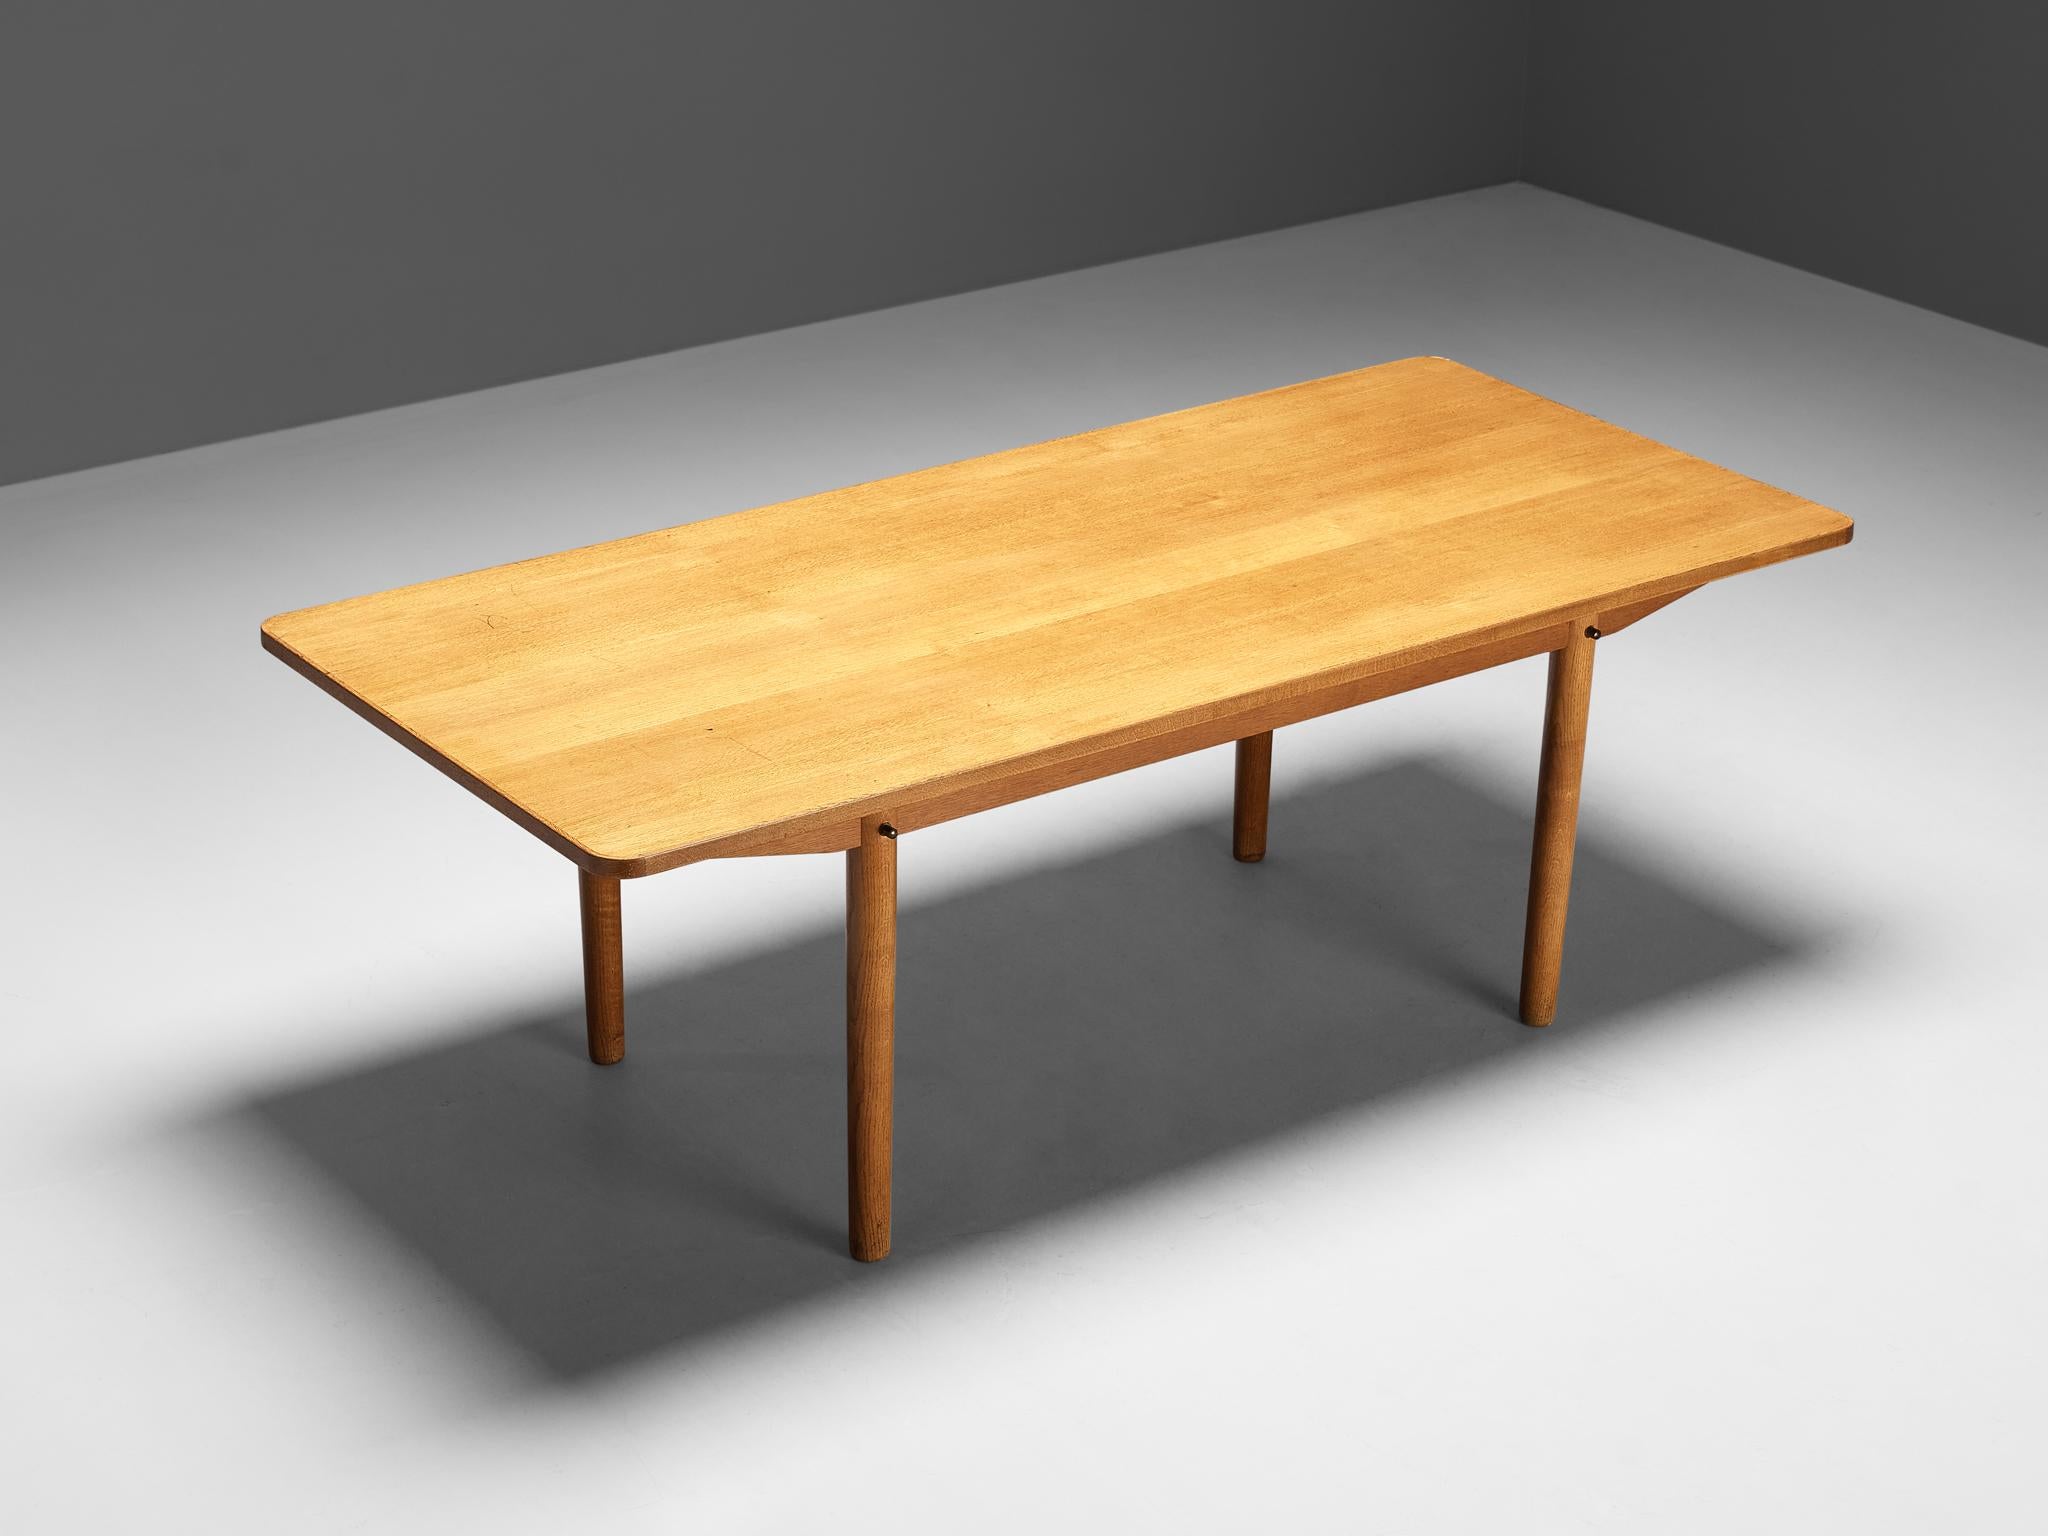 Dining table, oak, Denmark, 1960s 

Beautiful simplistic dining table made in Denmark in the 1960s. This Danish dining table features a long, rectangular top executed in oak. The warm table top has beautiful soft edges and rests on four circular